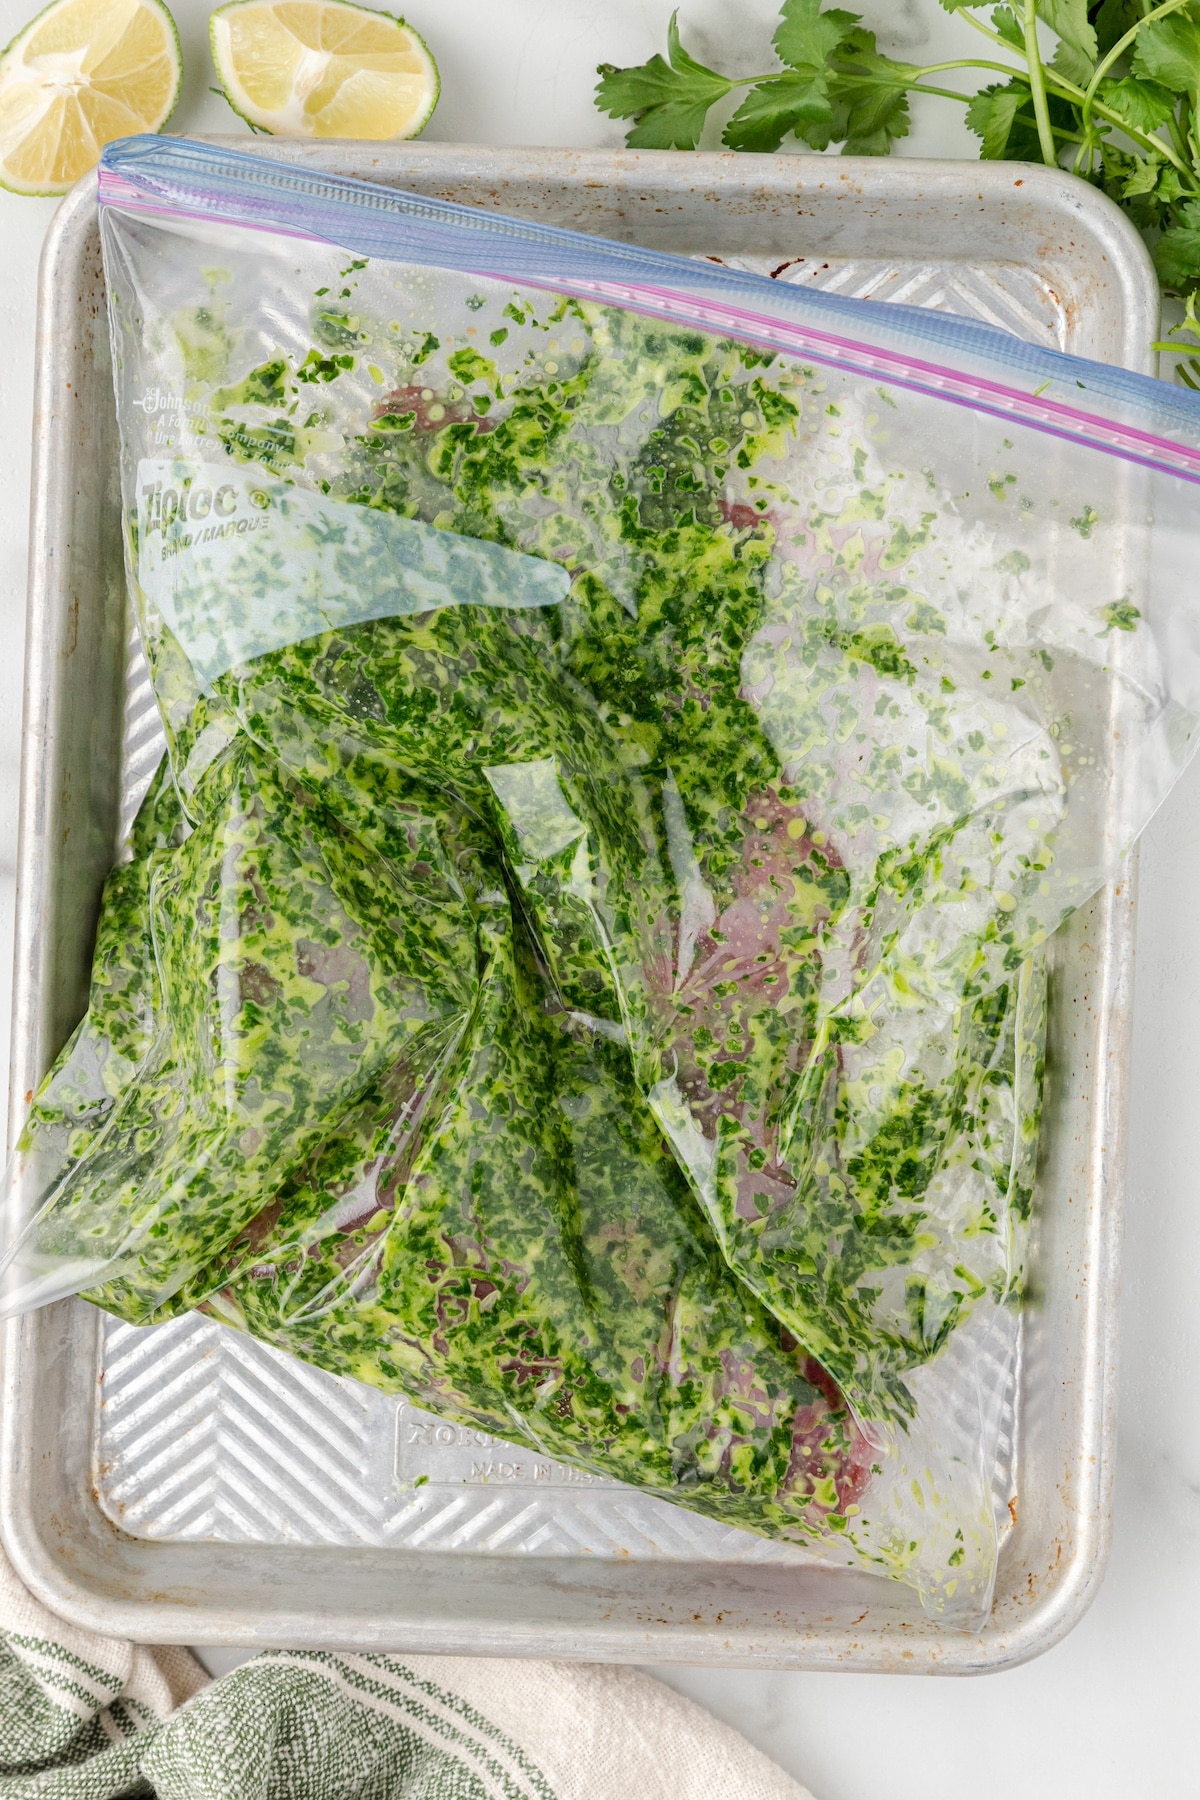 a flank steak with cilantro marinade in a zippered plastic bag